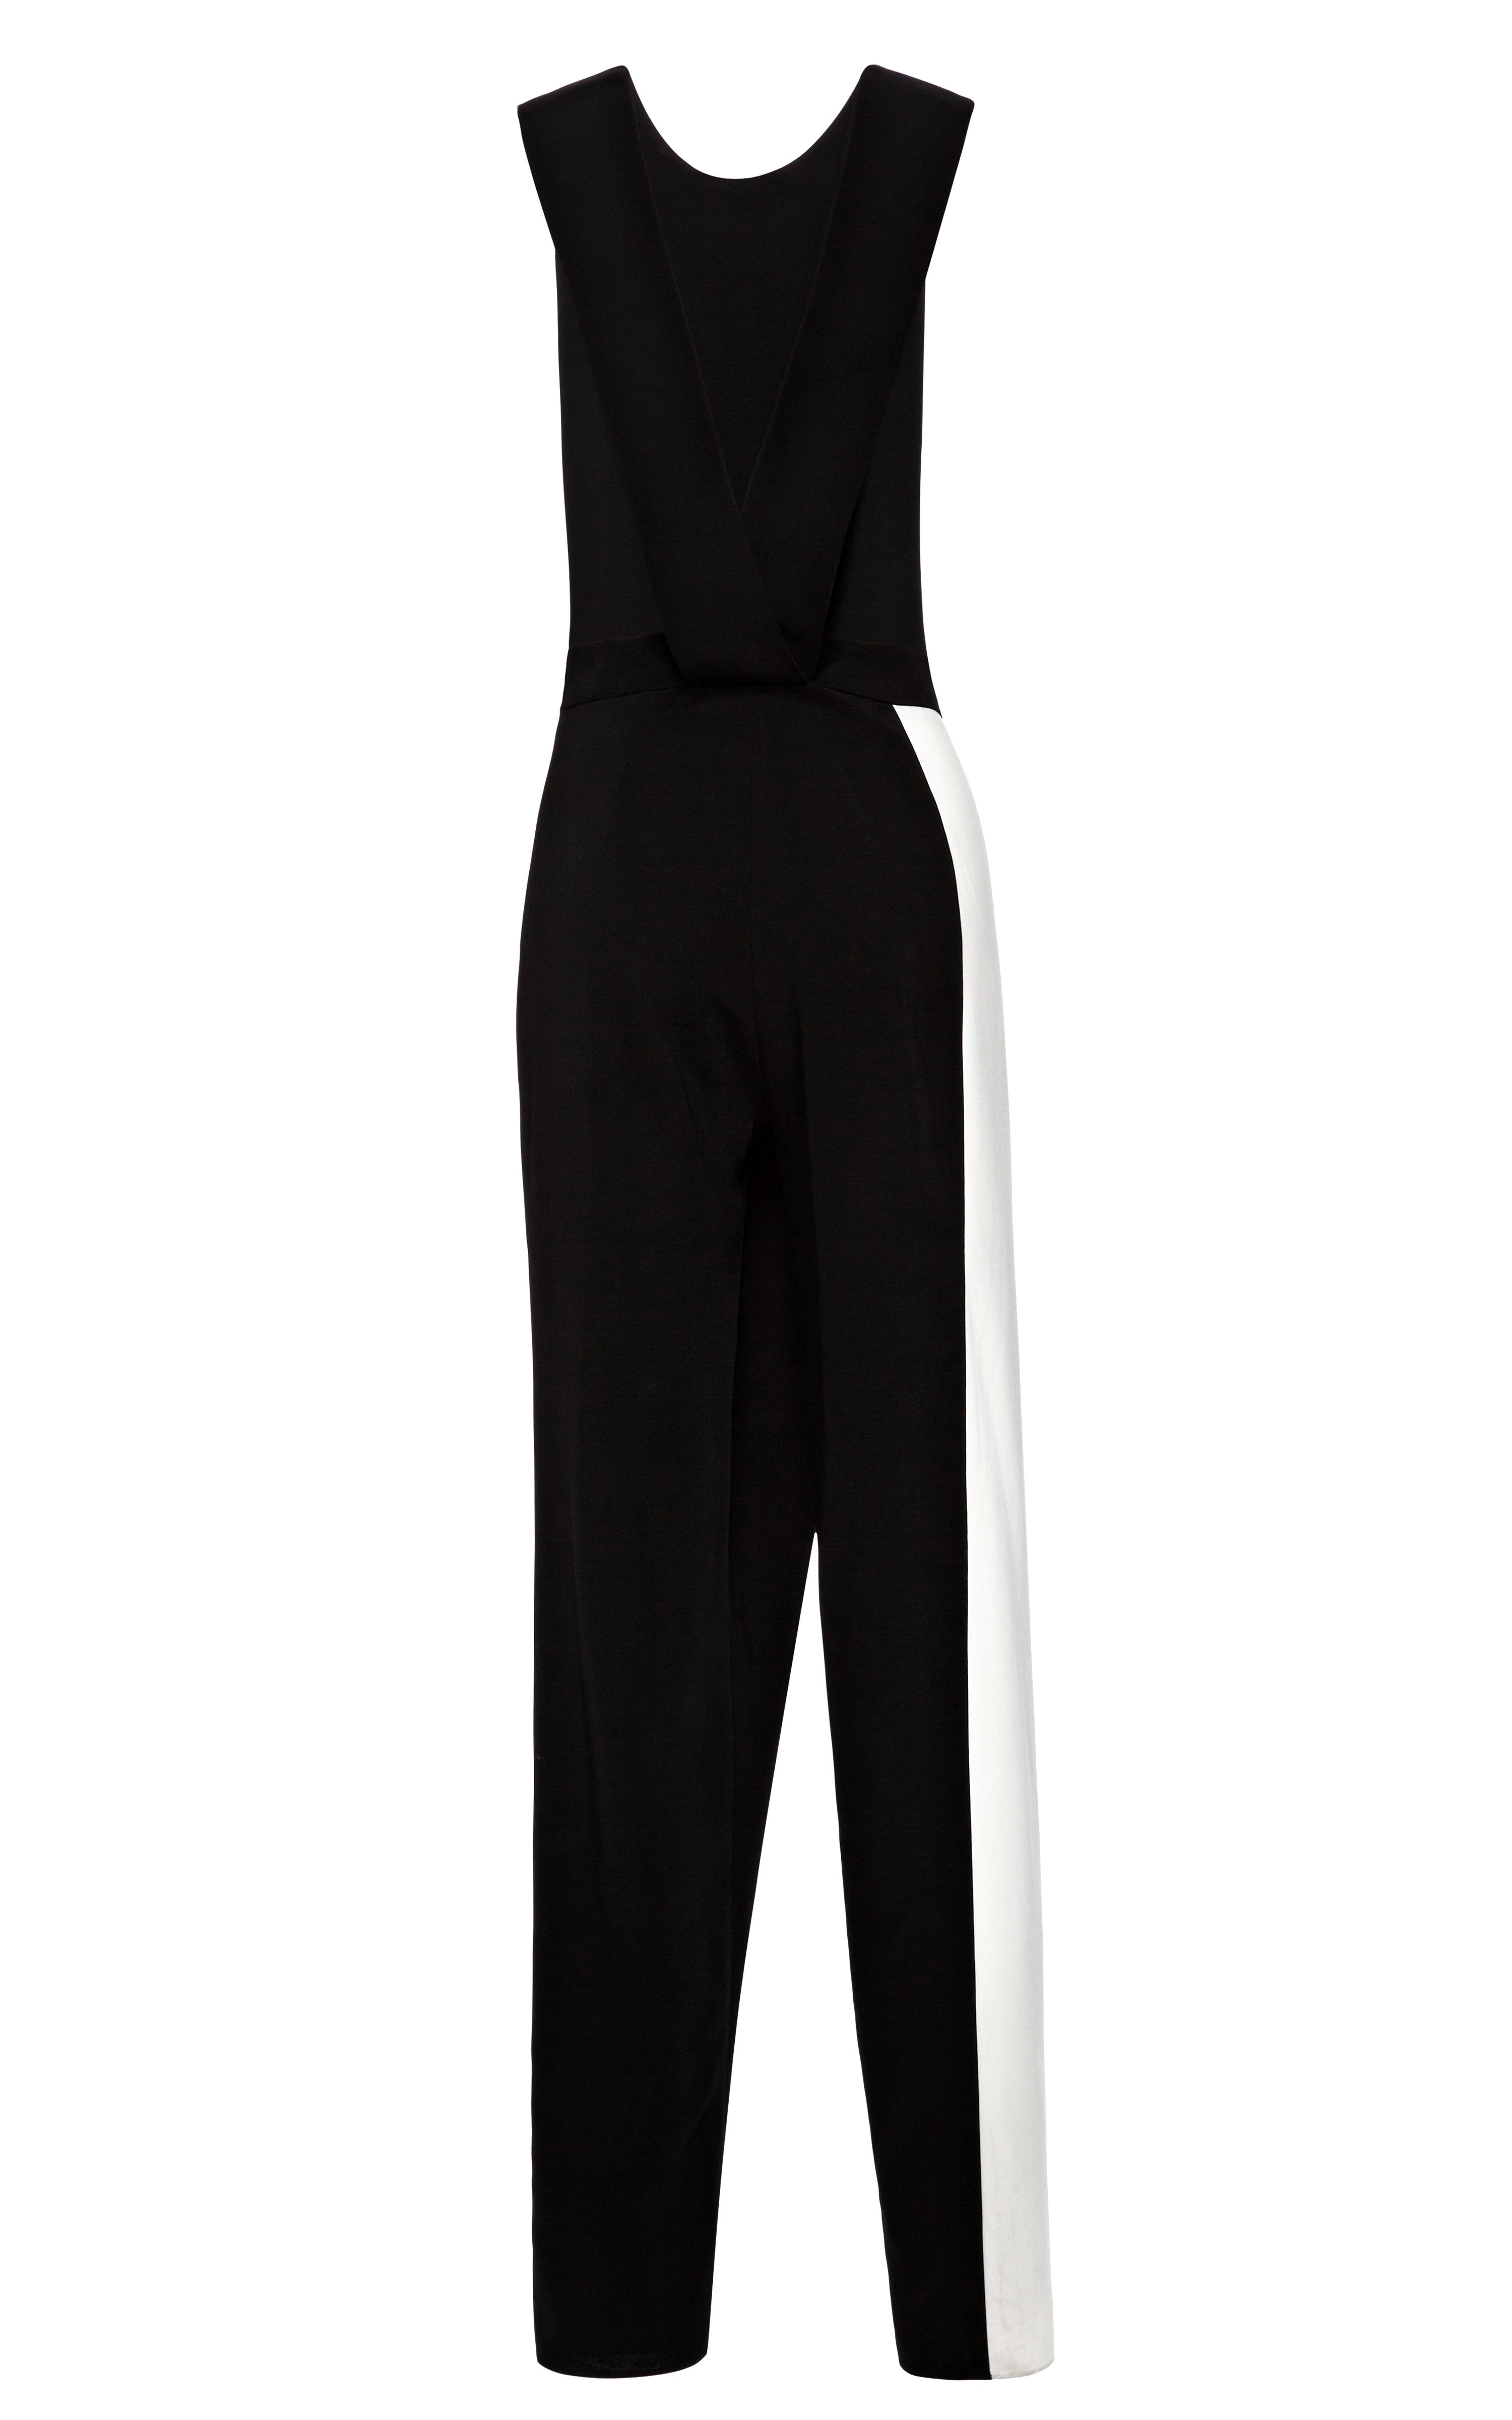 Lyst - Kalmanovich Black Pinafore Jumpsuit with White Vertical Side ...